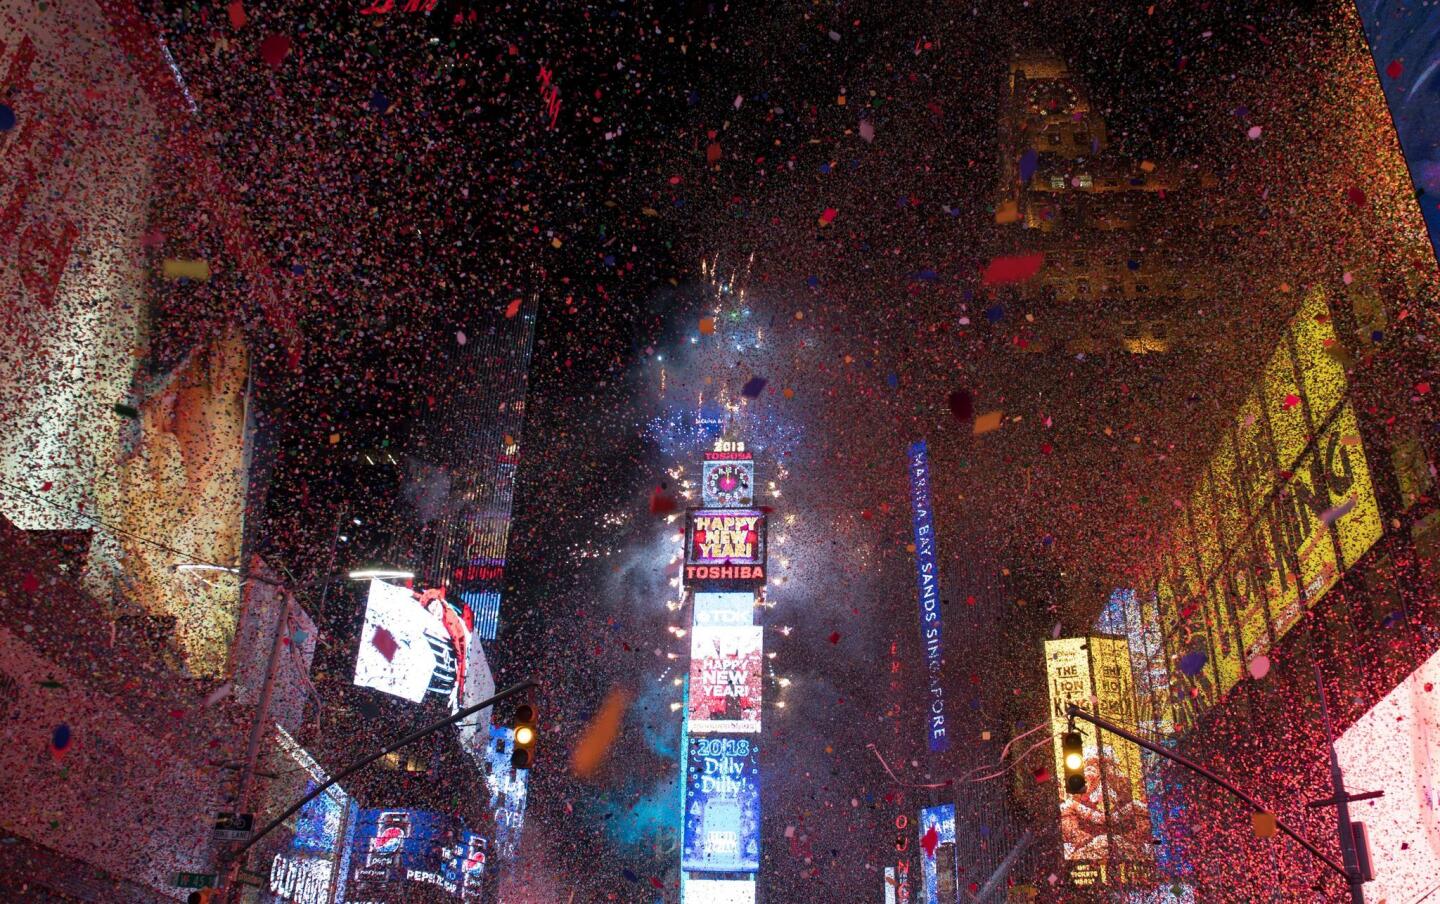 After a televised extravaganza that usually involves Ryan Seacrest — and a countdown, of course — the Times Square ball drops to ring in the new year, seen here Jan. 1, 2018.